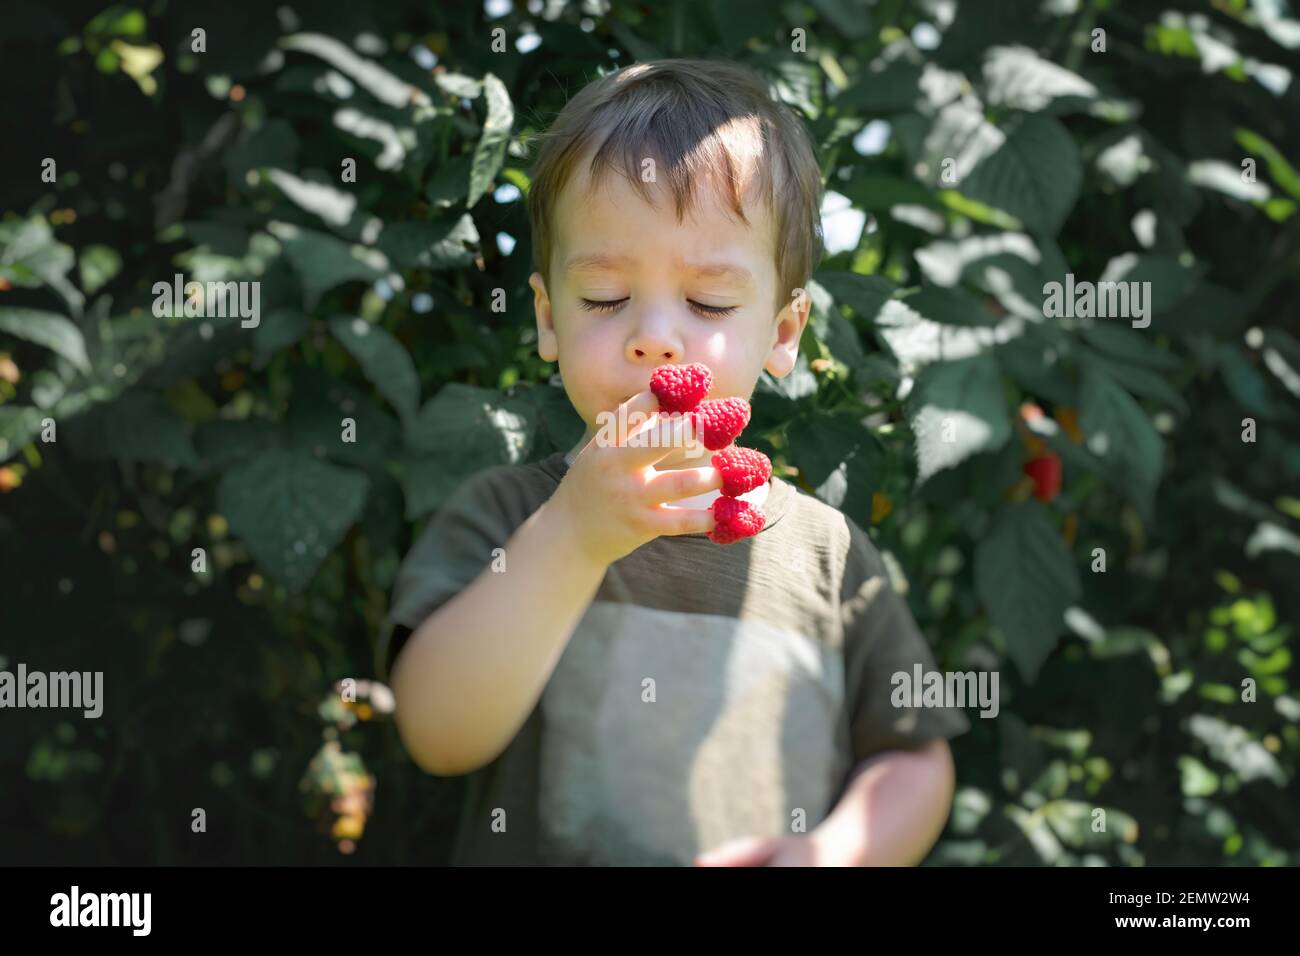 Small boy eating raspberry dressed on his toes in summer garden Stock Photo